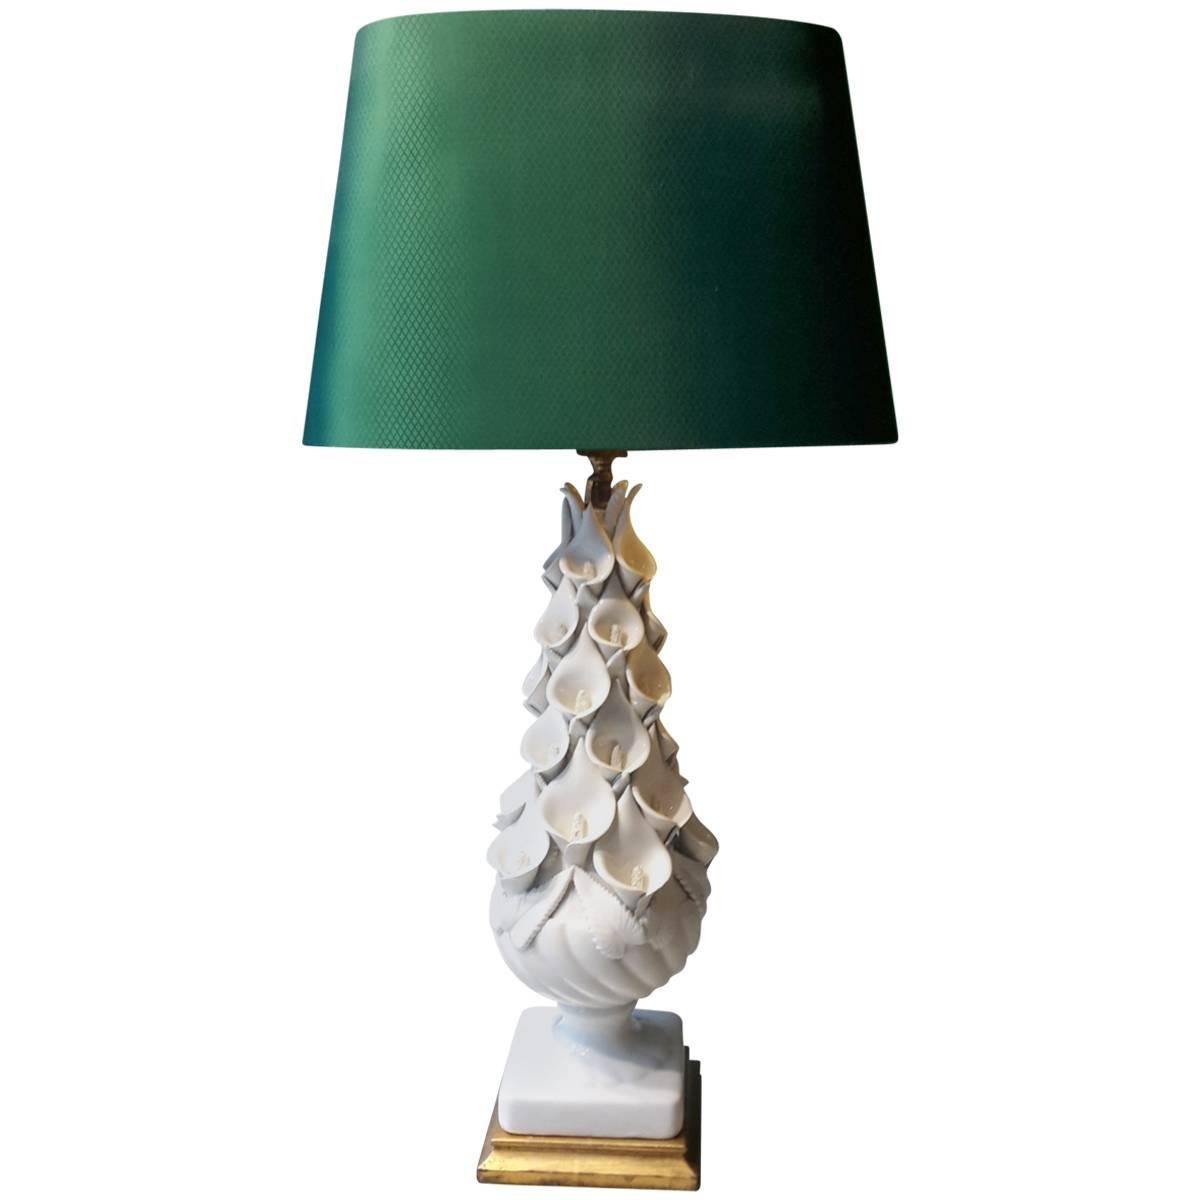 20th Century Spanish White Lamp with Calla Lilly Made of Ceramic Green Shade